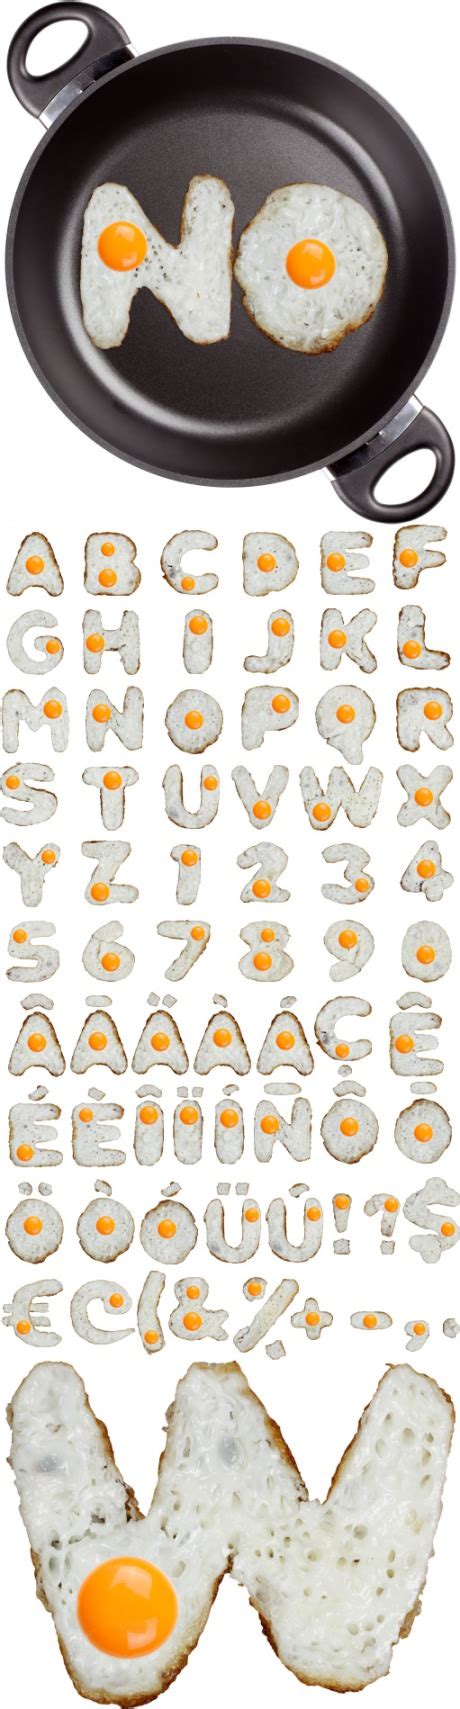 Eggs Font A Typeface Made Of Carefully Shaped Fried Eggs Gaming